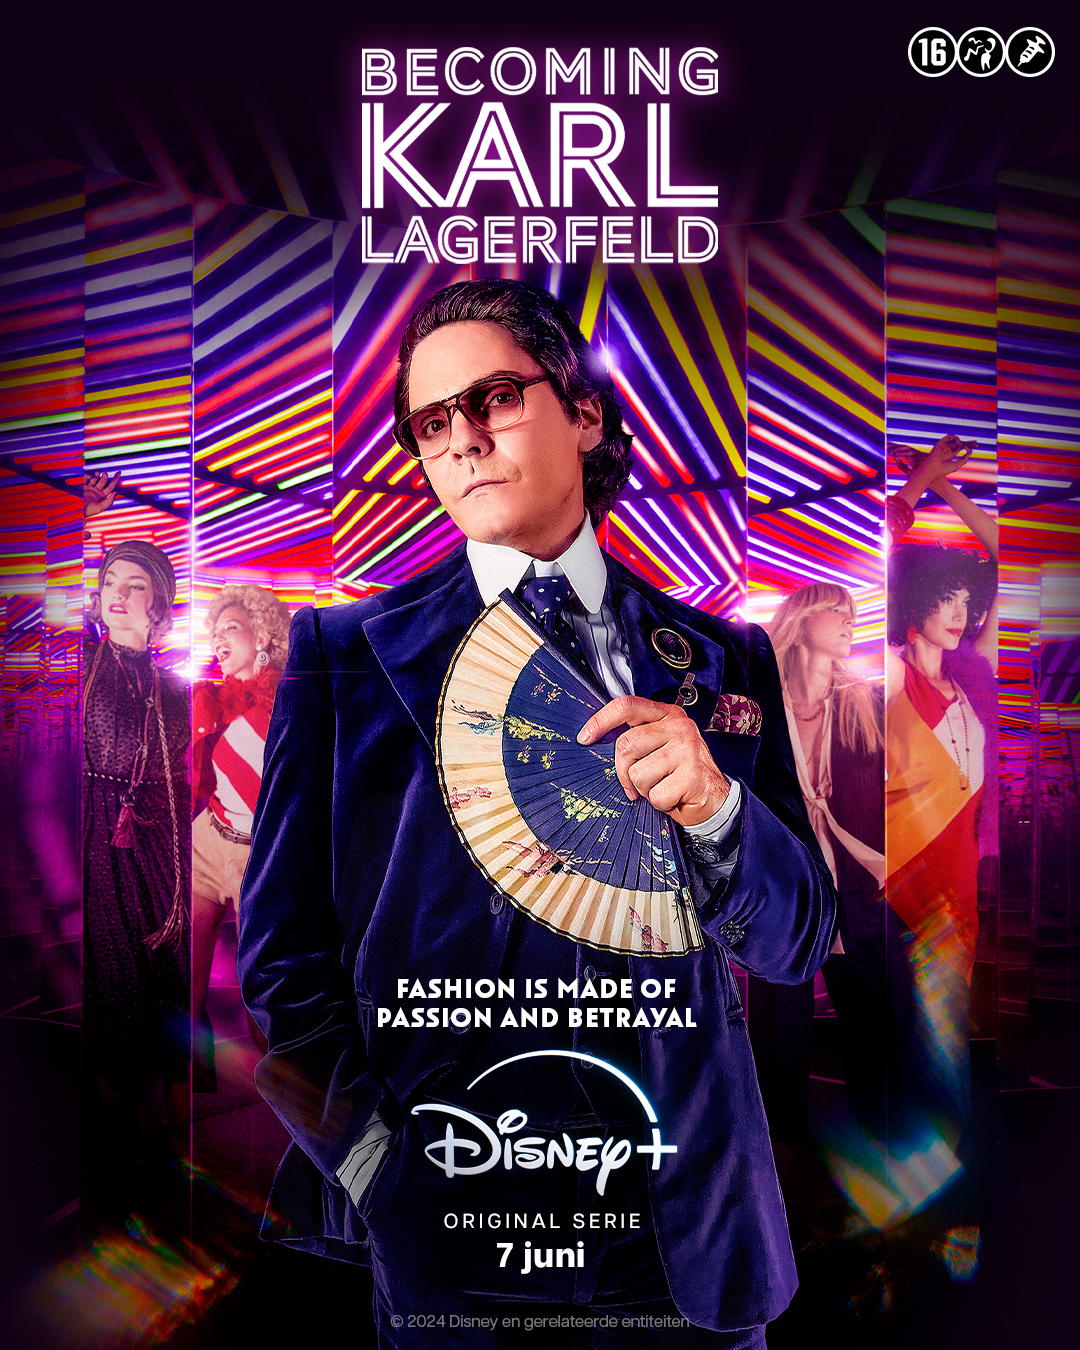 'BECOMING KARL LAGERFELD' IS COMING TO DISNEY+ - Numéro Netherlands